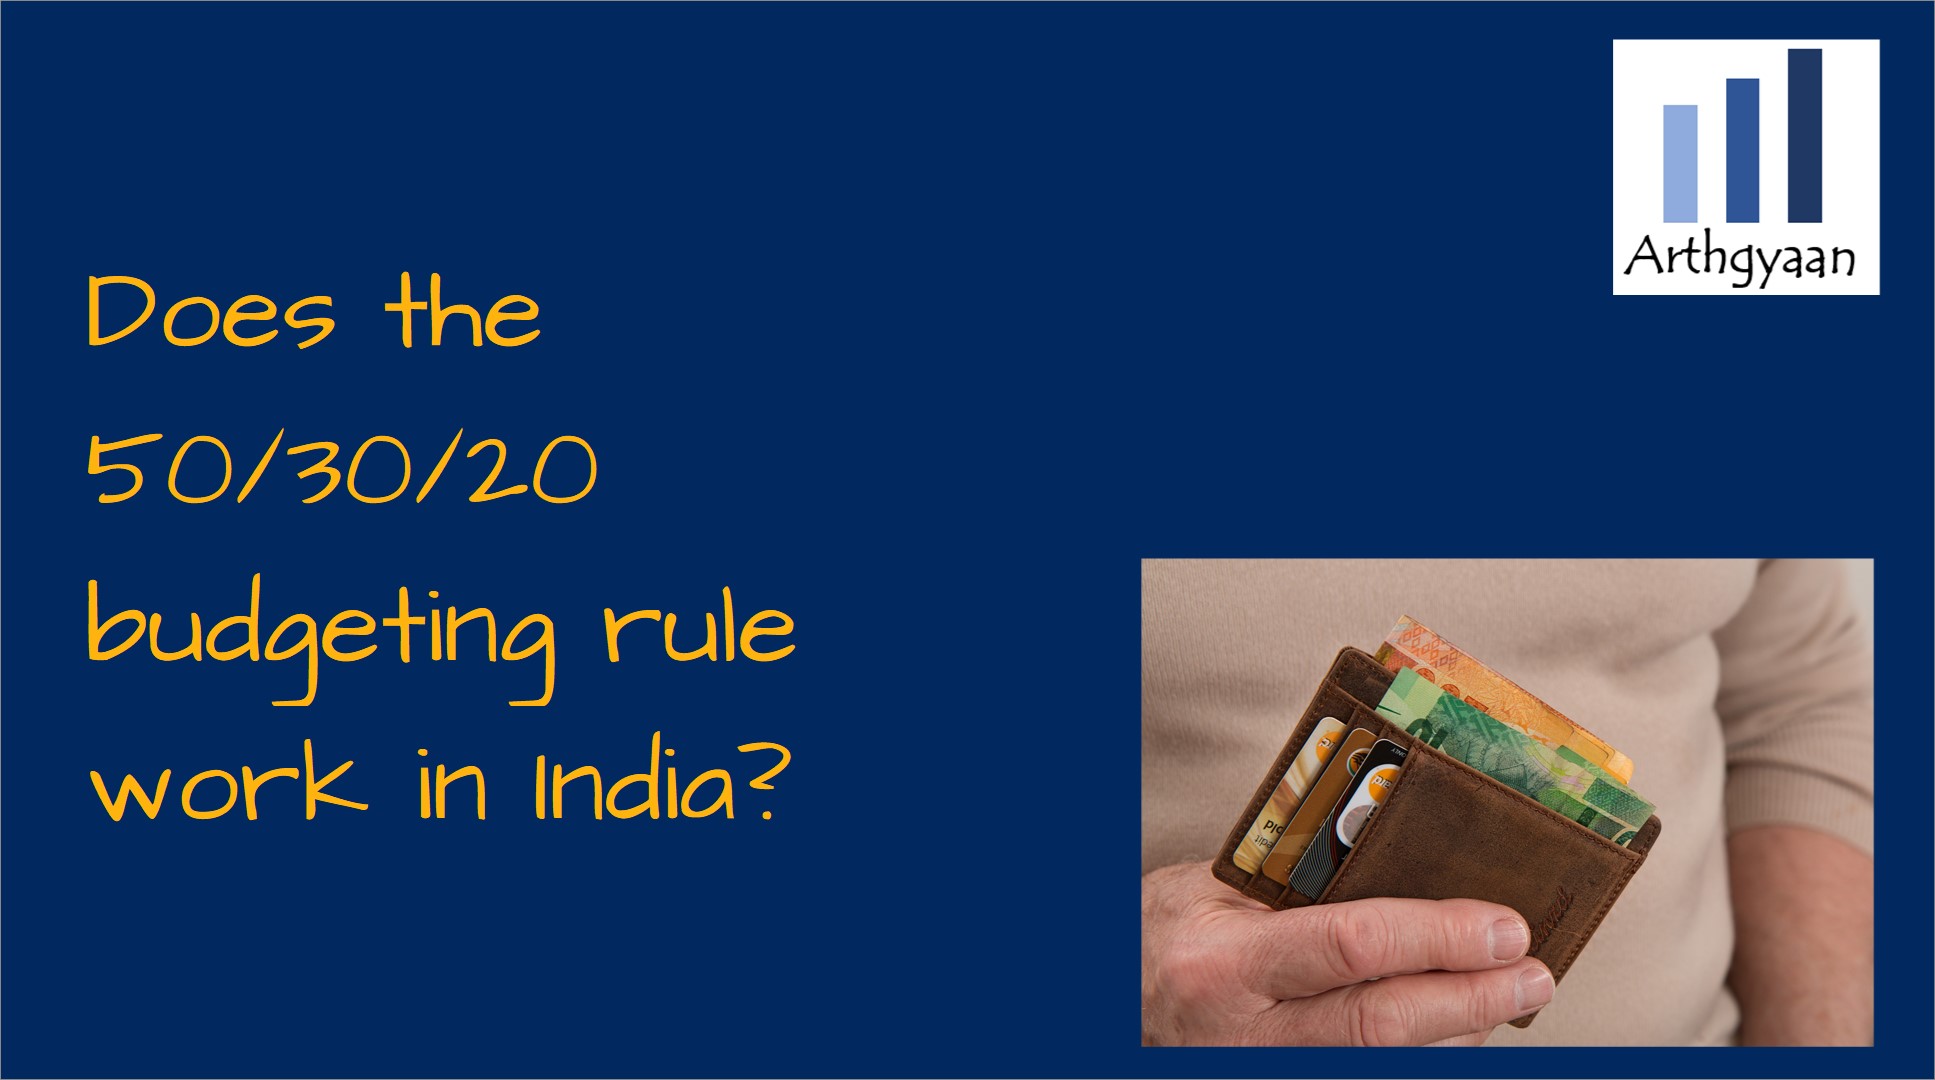 Does the 50/30/20 budgeting rule work in India?